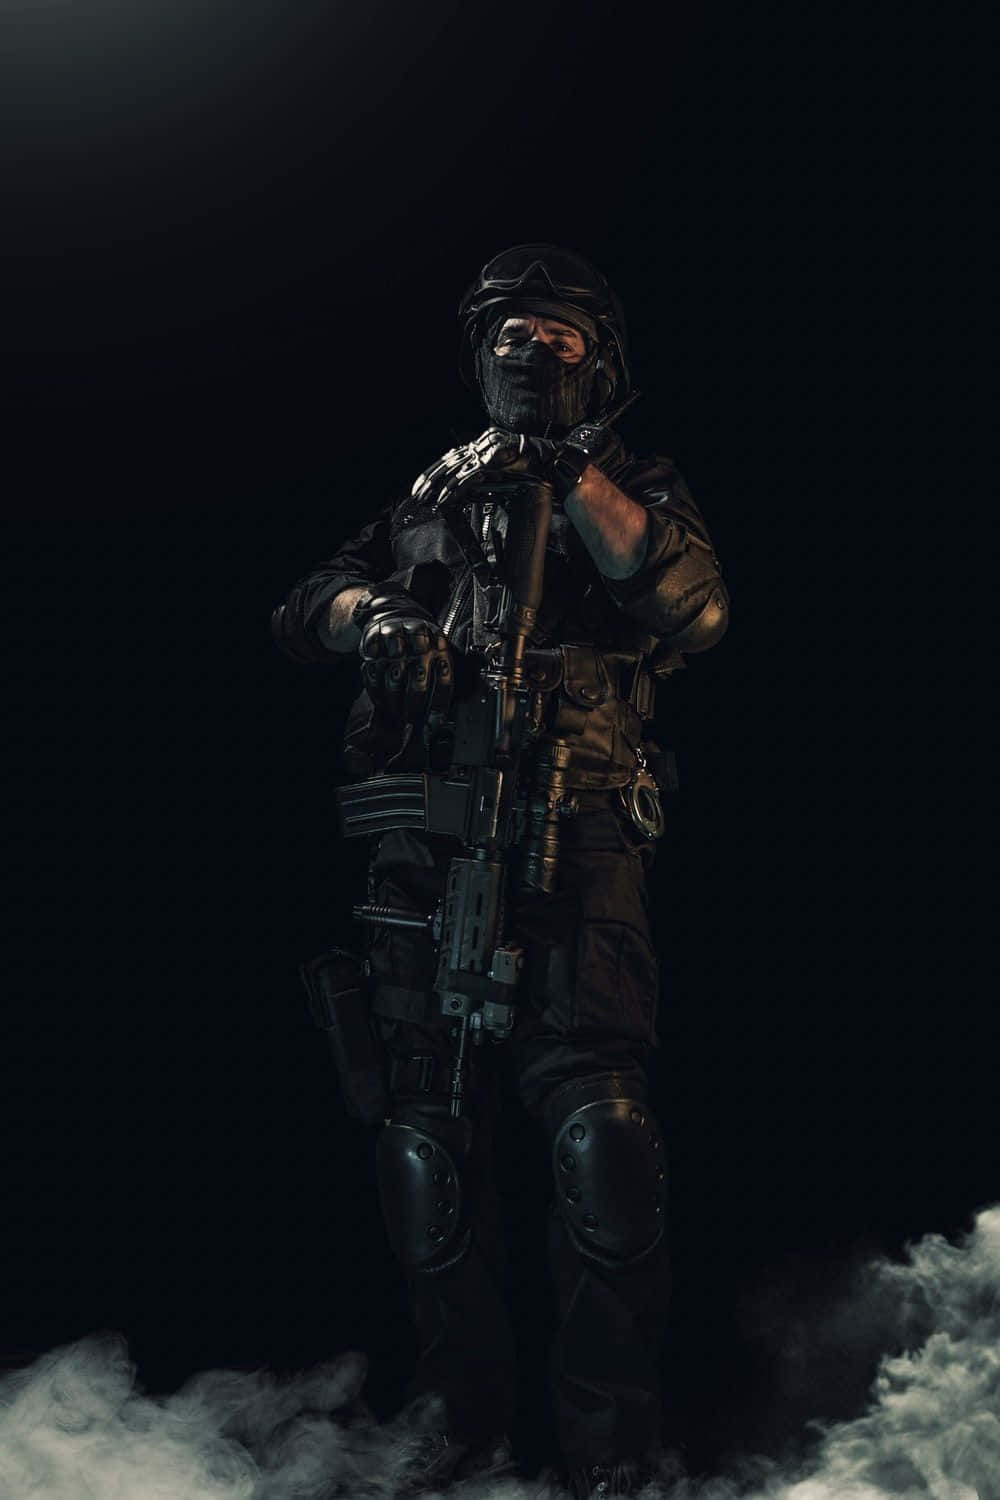 Black Amoled Soldier Pictures